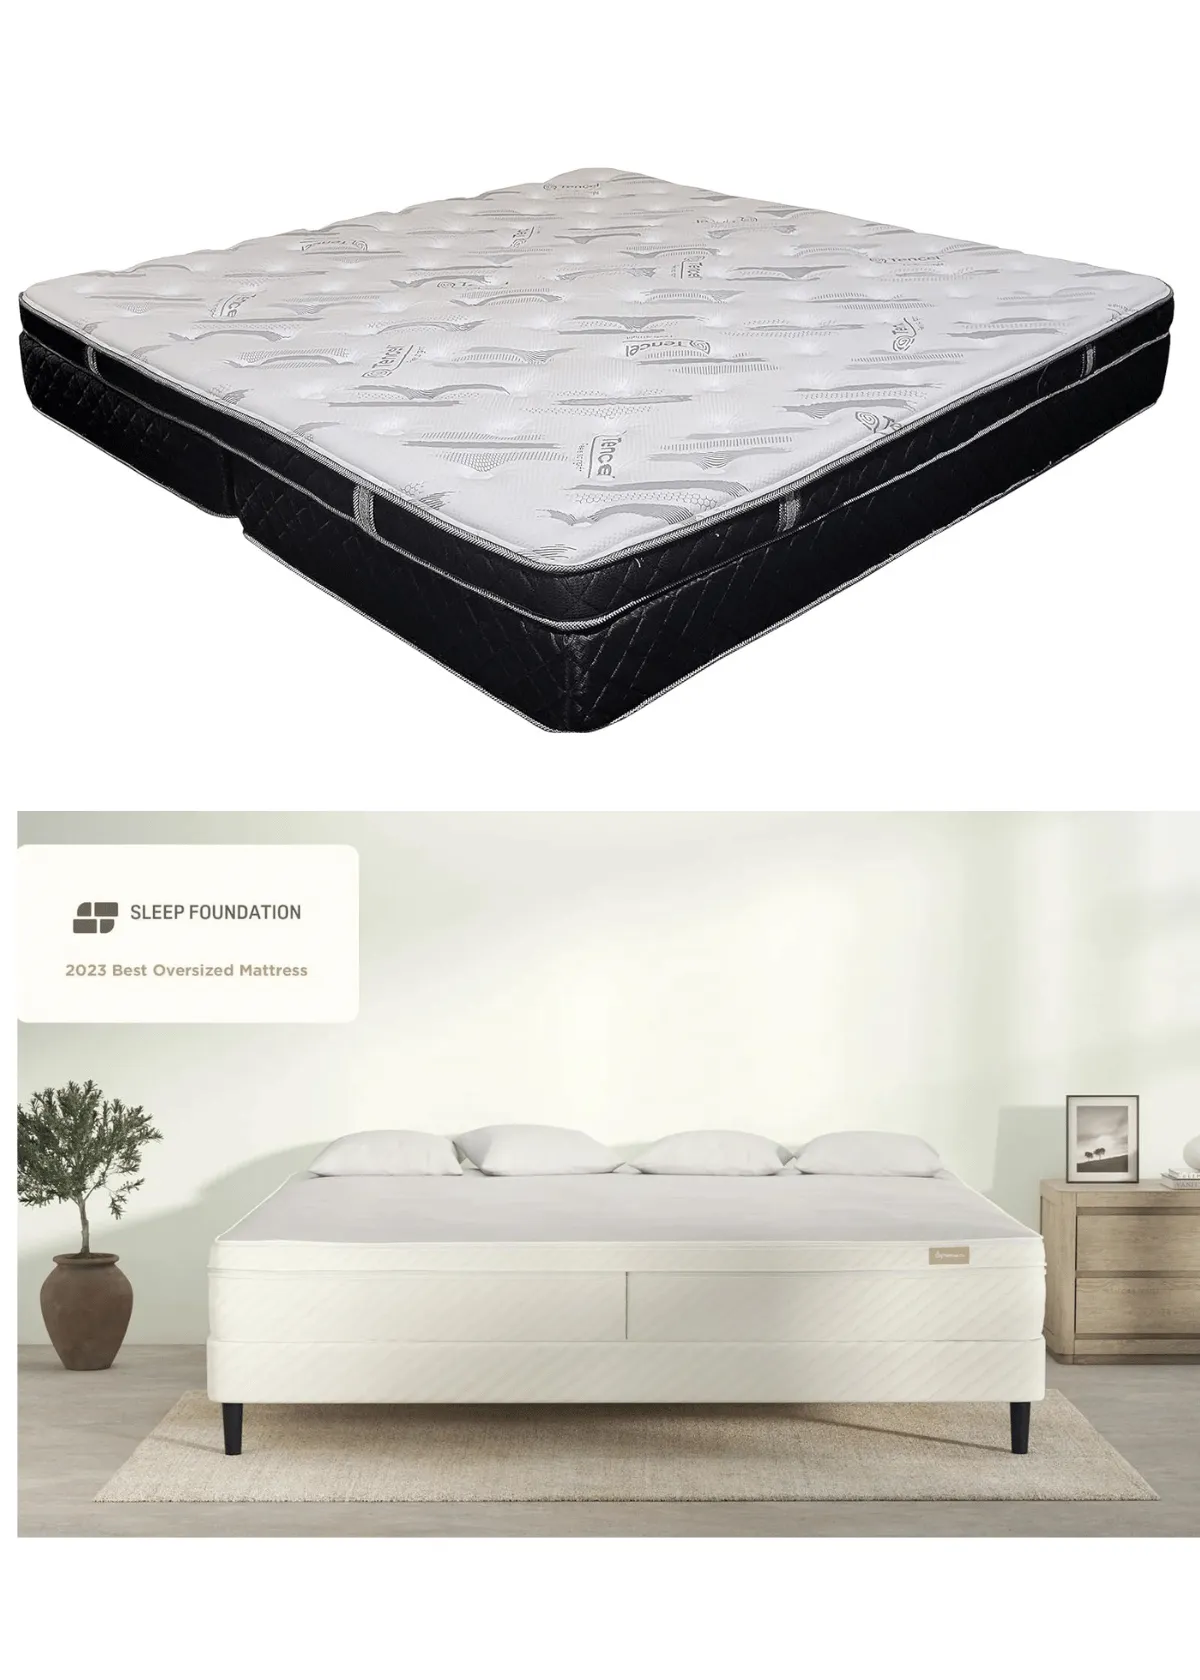 "Is the Wyoming King Mattress Best for Couples Needing Space?"